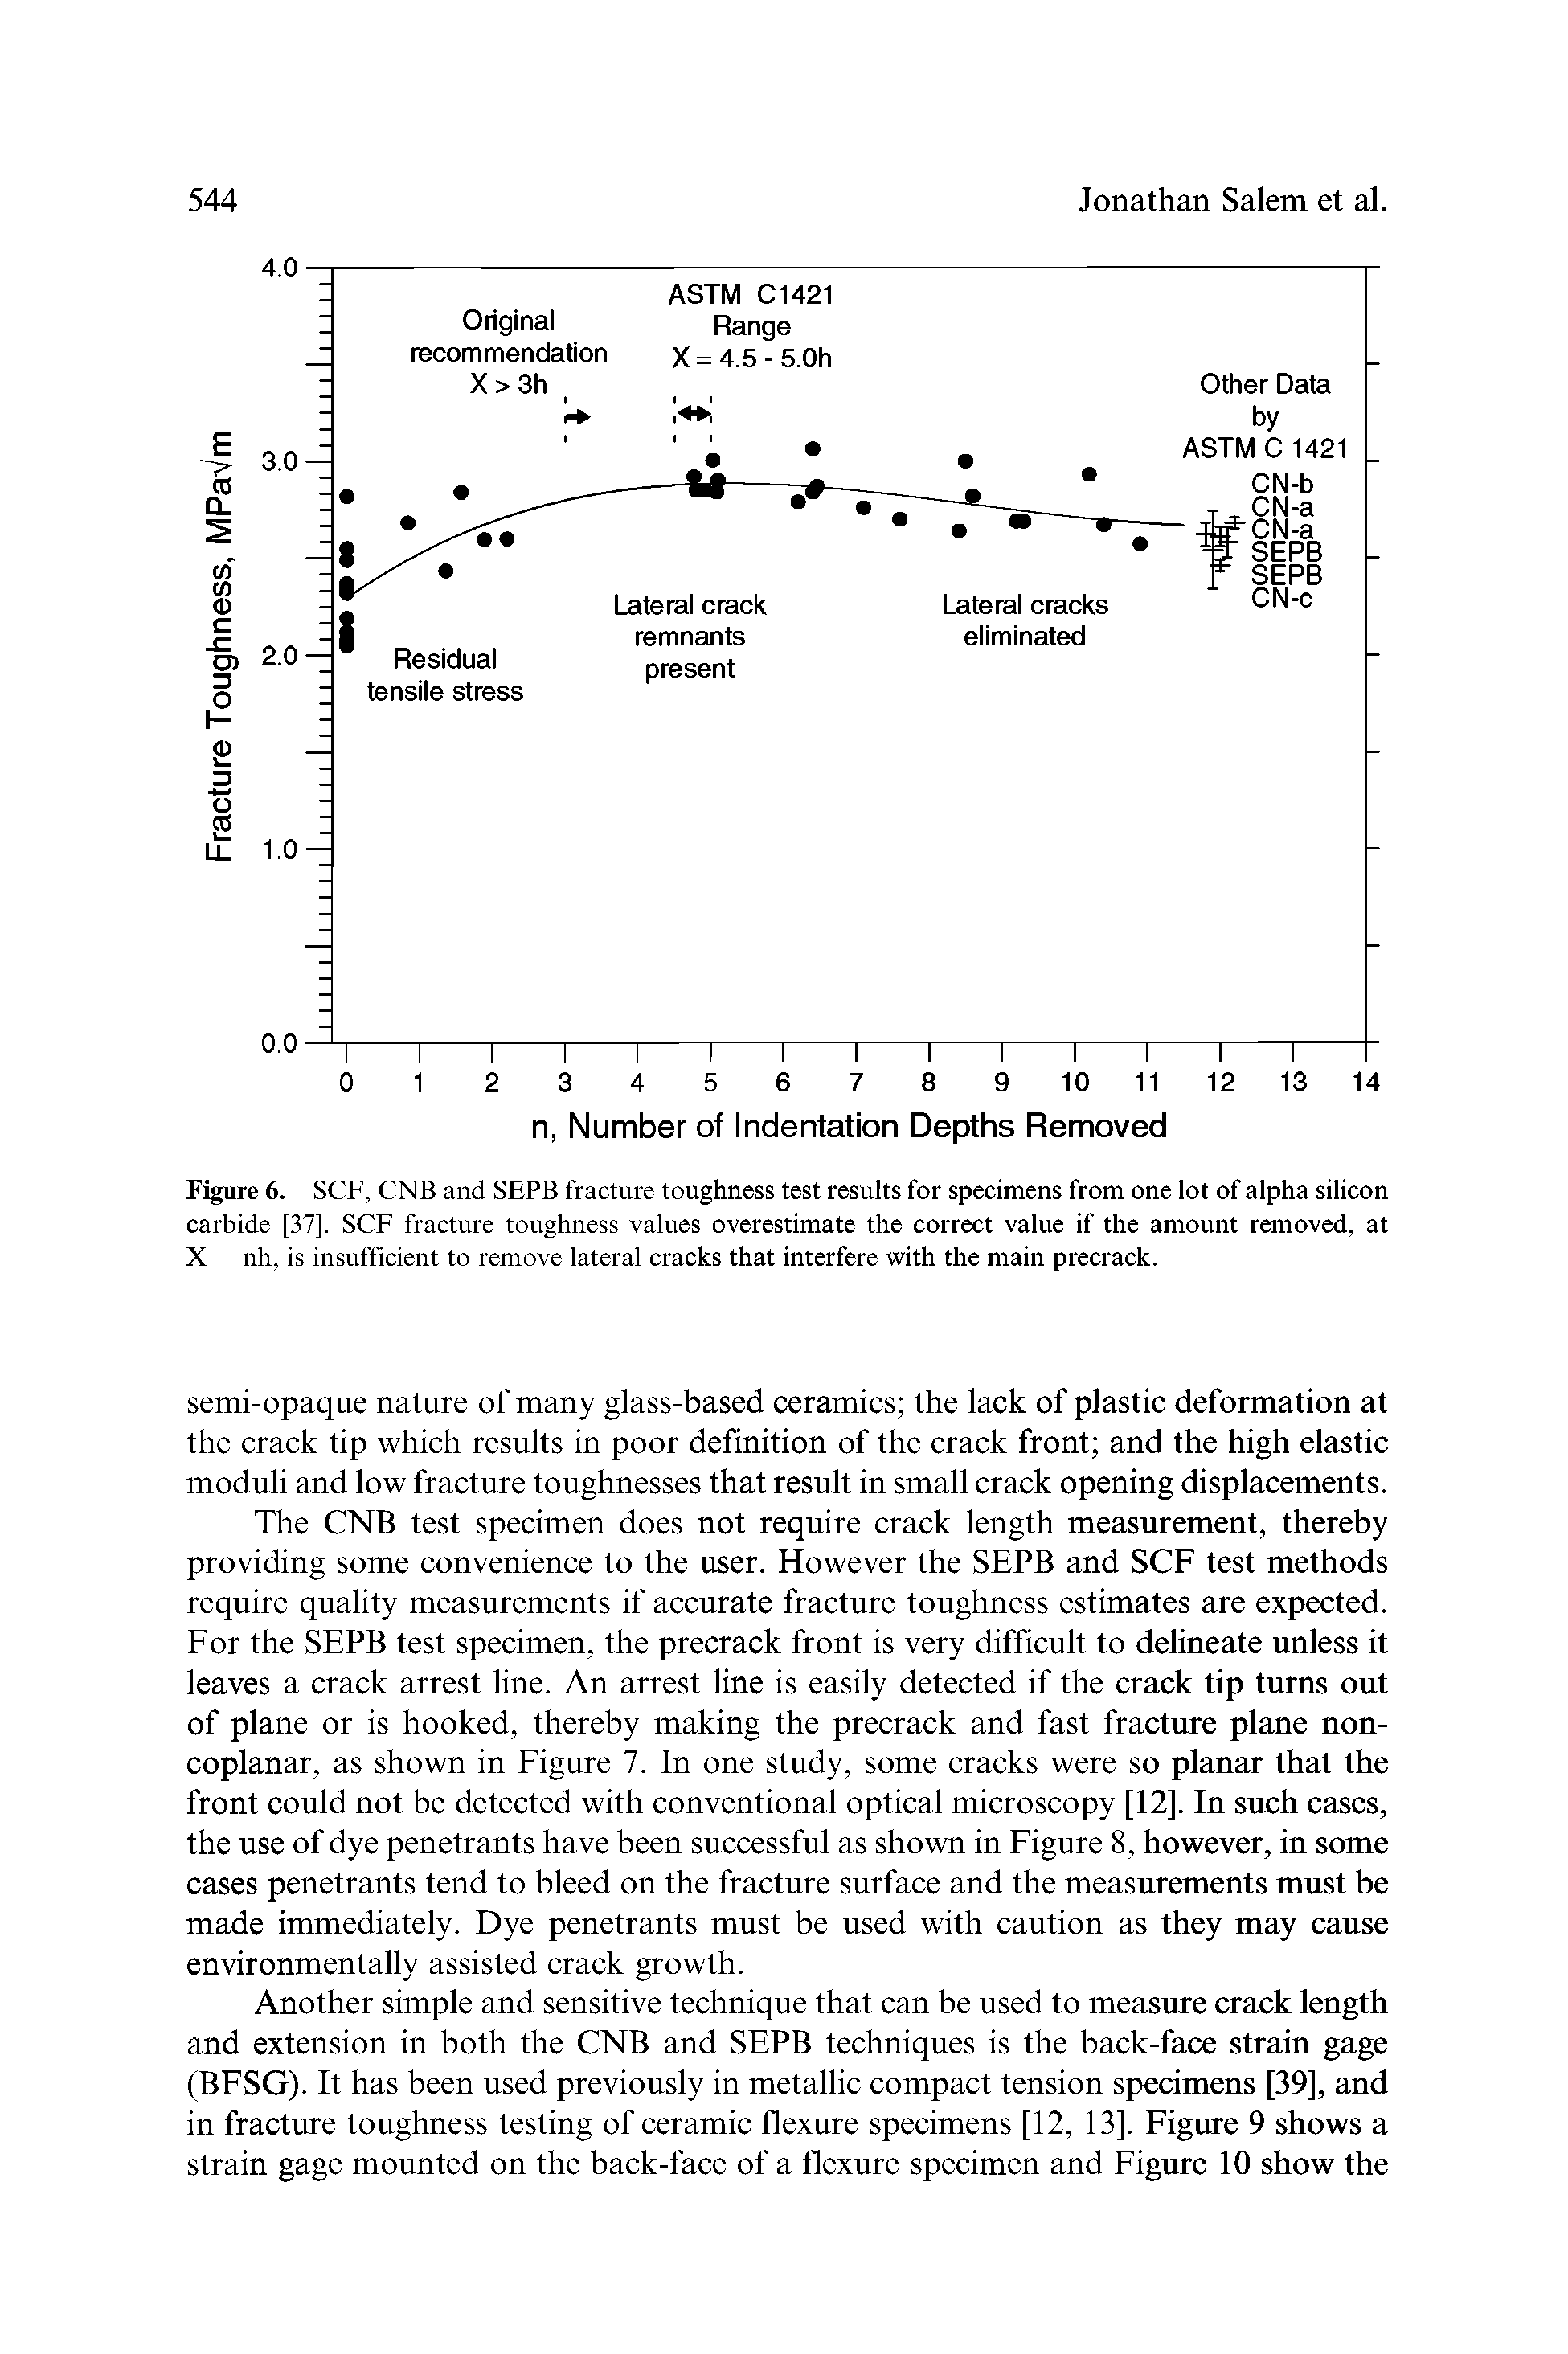 Figure 6. SCF, CNB and SEPB fracture toughness test results for specimens from one lot of alpha silicon carbide [37], SCF fracture toughness values overestimate the correct value if the amount removed, at X nh, is insufficient to remove lateral cracks that interfere with the main precrack.